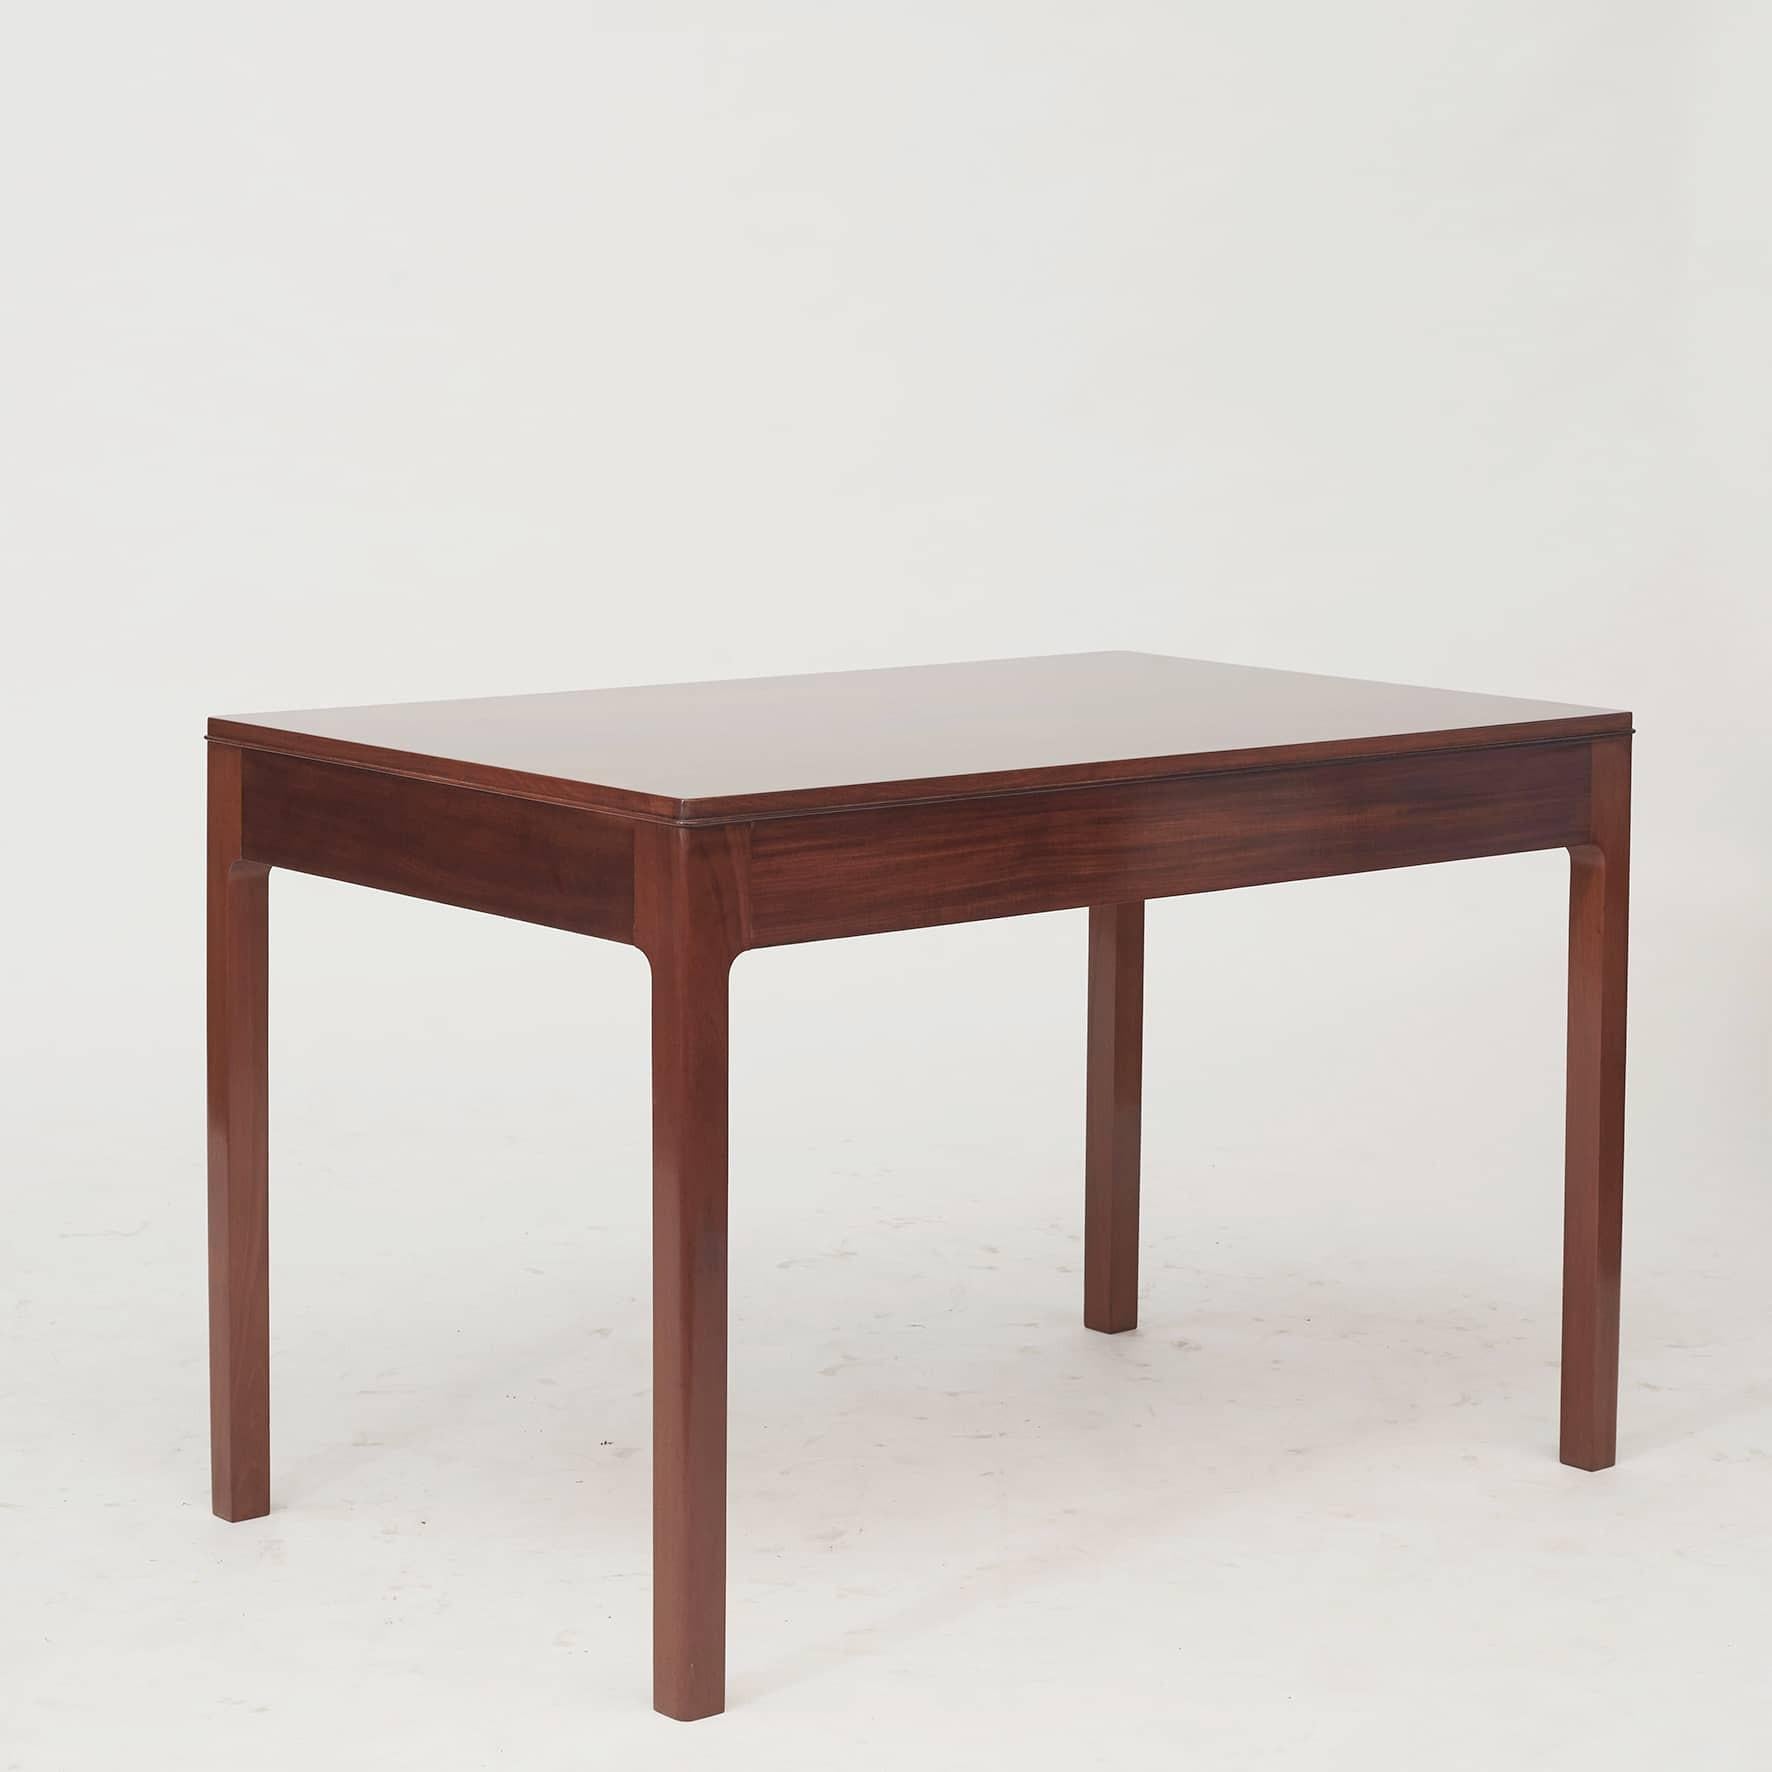 Frits Henningsen 1889-1965.
Mahogany desk with 3 drawers to the front. Raised on four straight, square legs with rounded corners on the outer side.
An elegant and beautiful desk with fine details in a Classic, modern style that will never go out